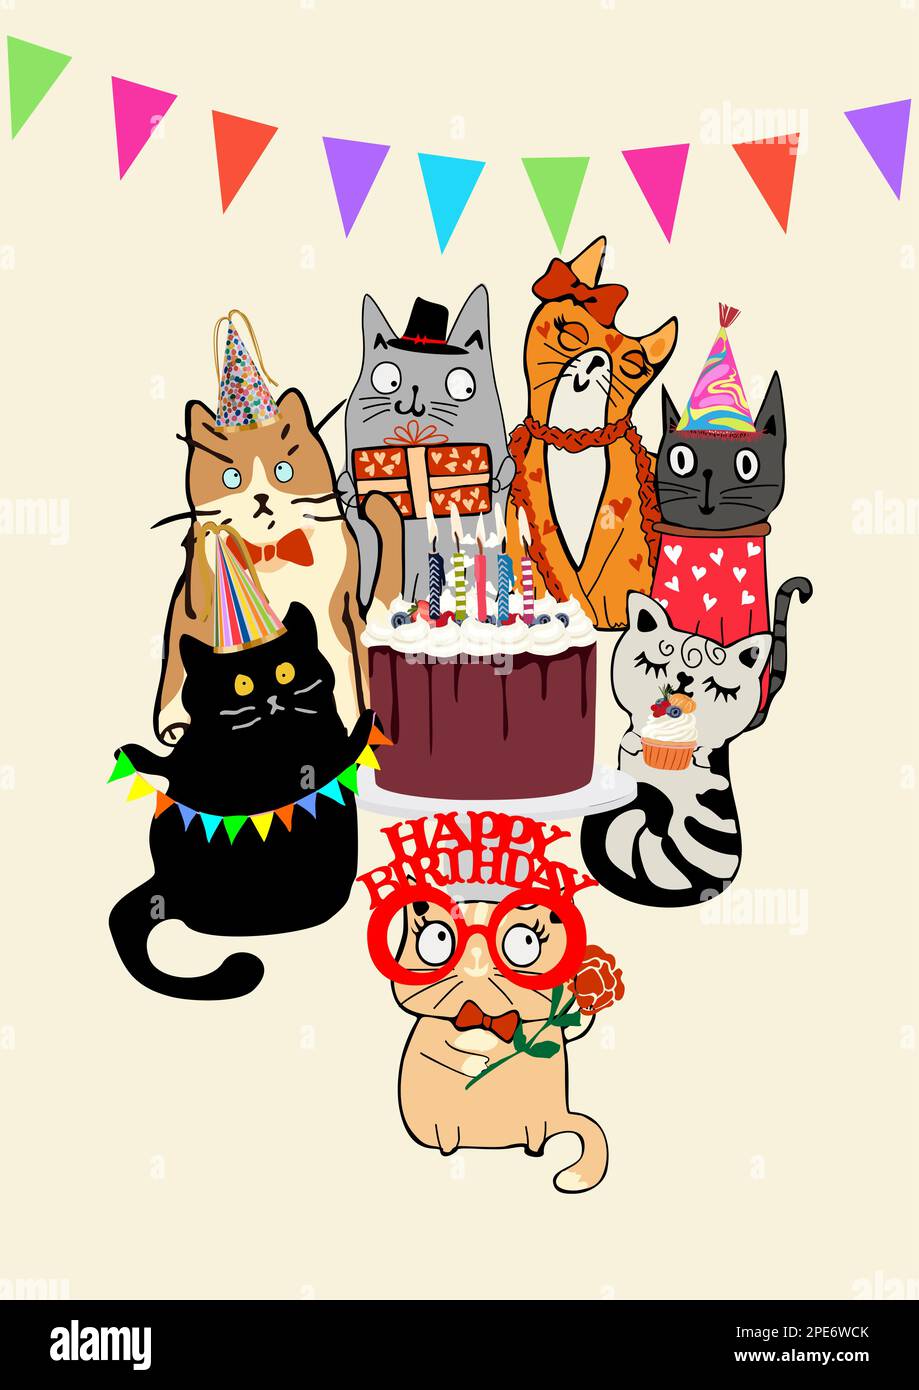 Happy birthday greeting card with cute cats vector Stock Vector ...